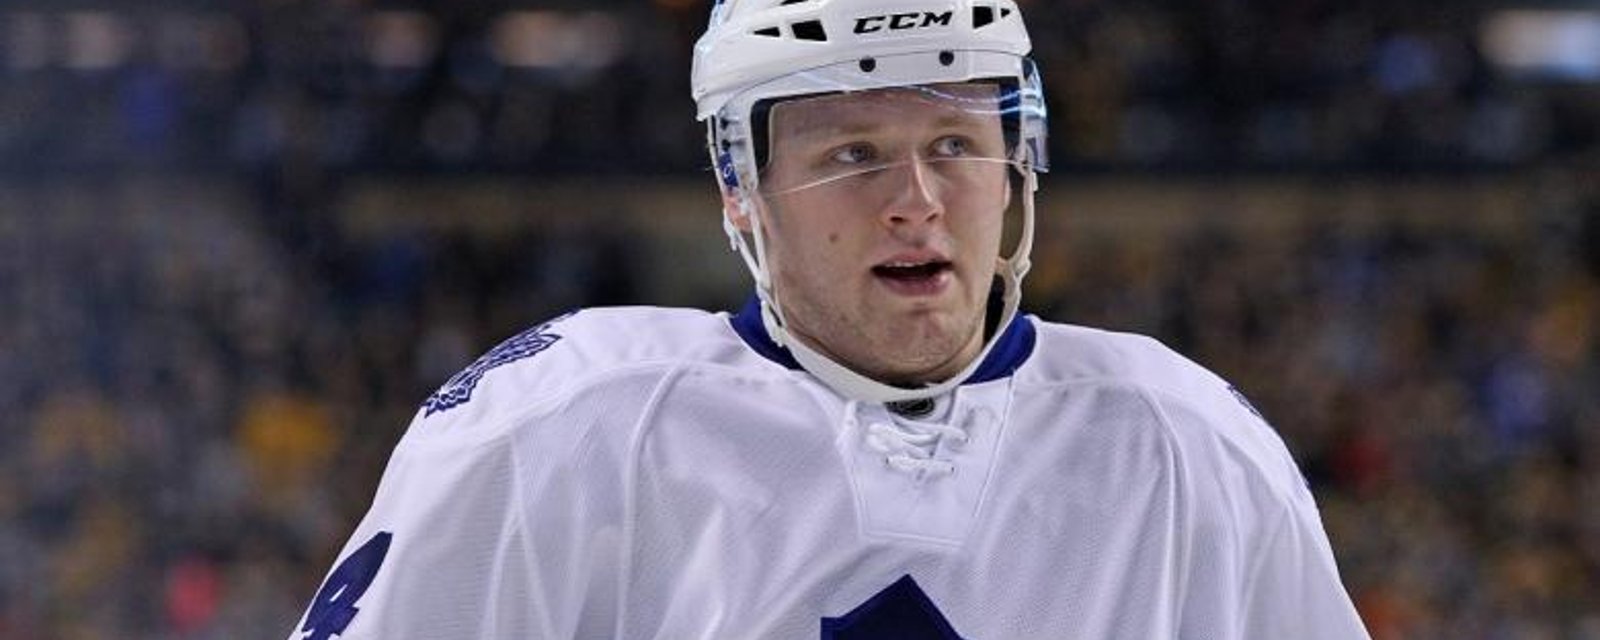 Morgan Rielly gives clue as to who the Leafs will draft at #1?